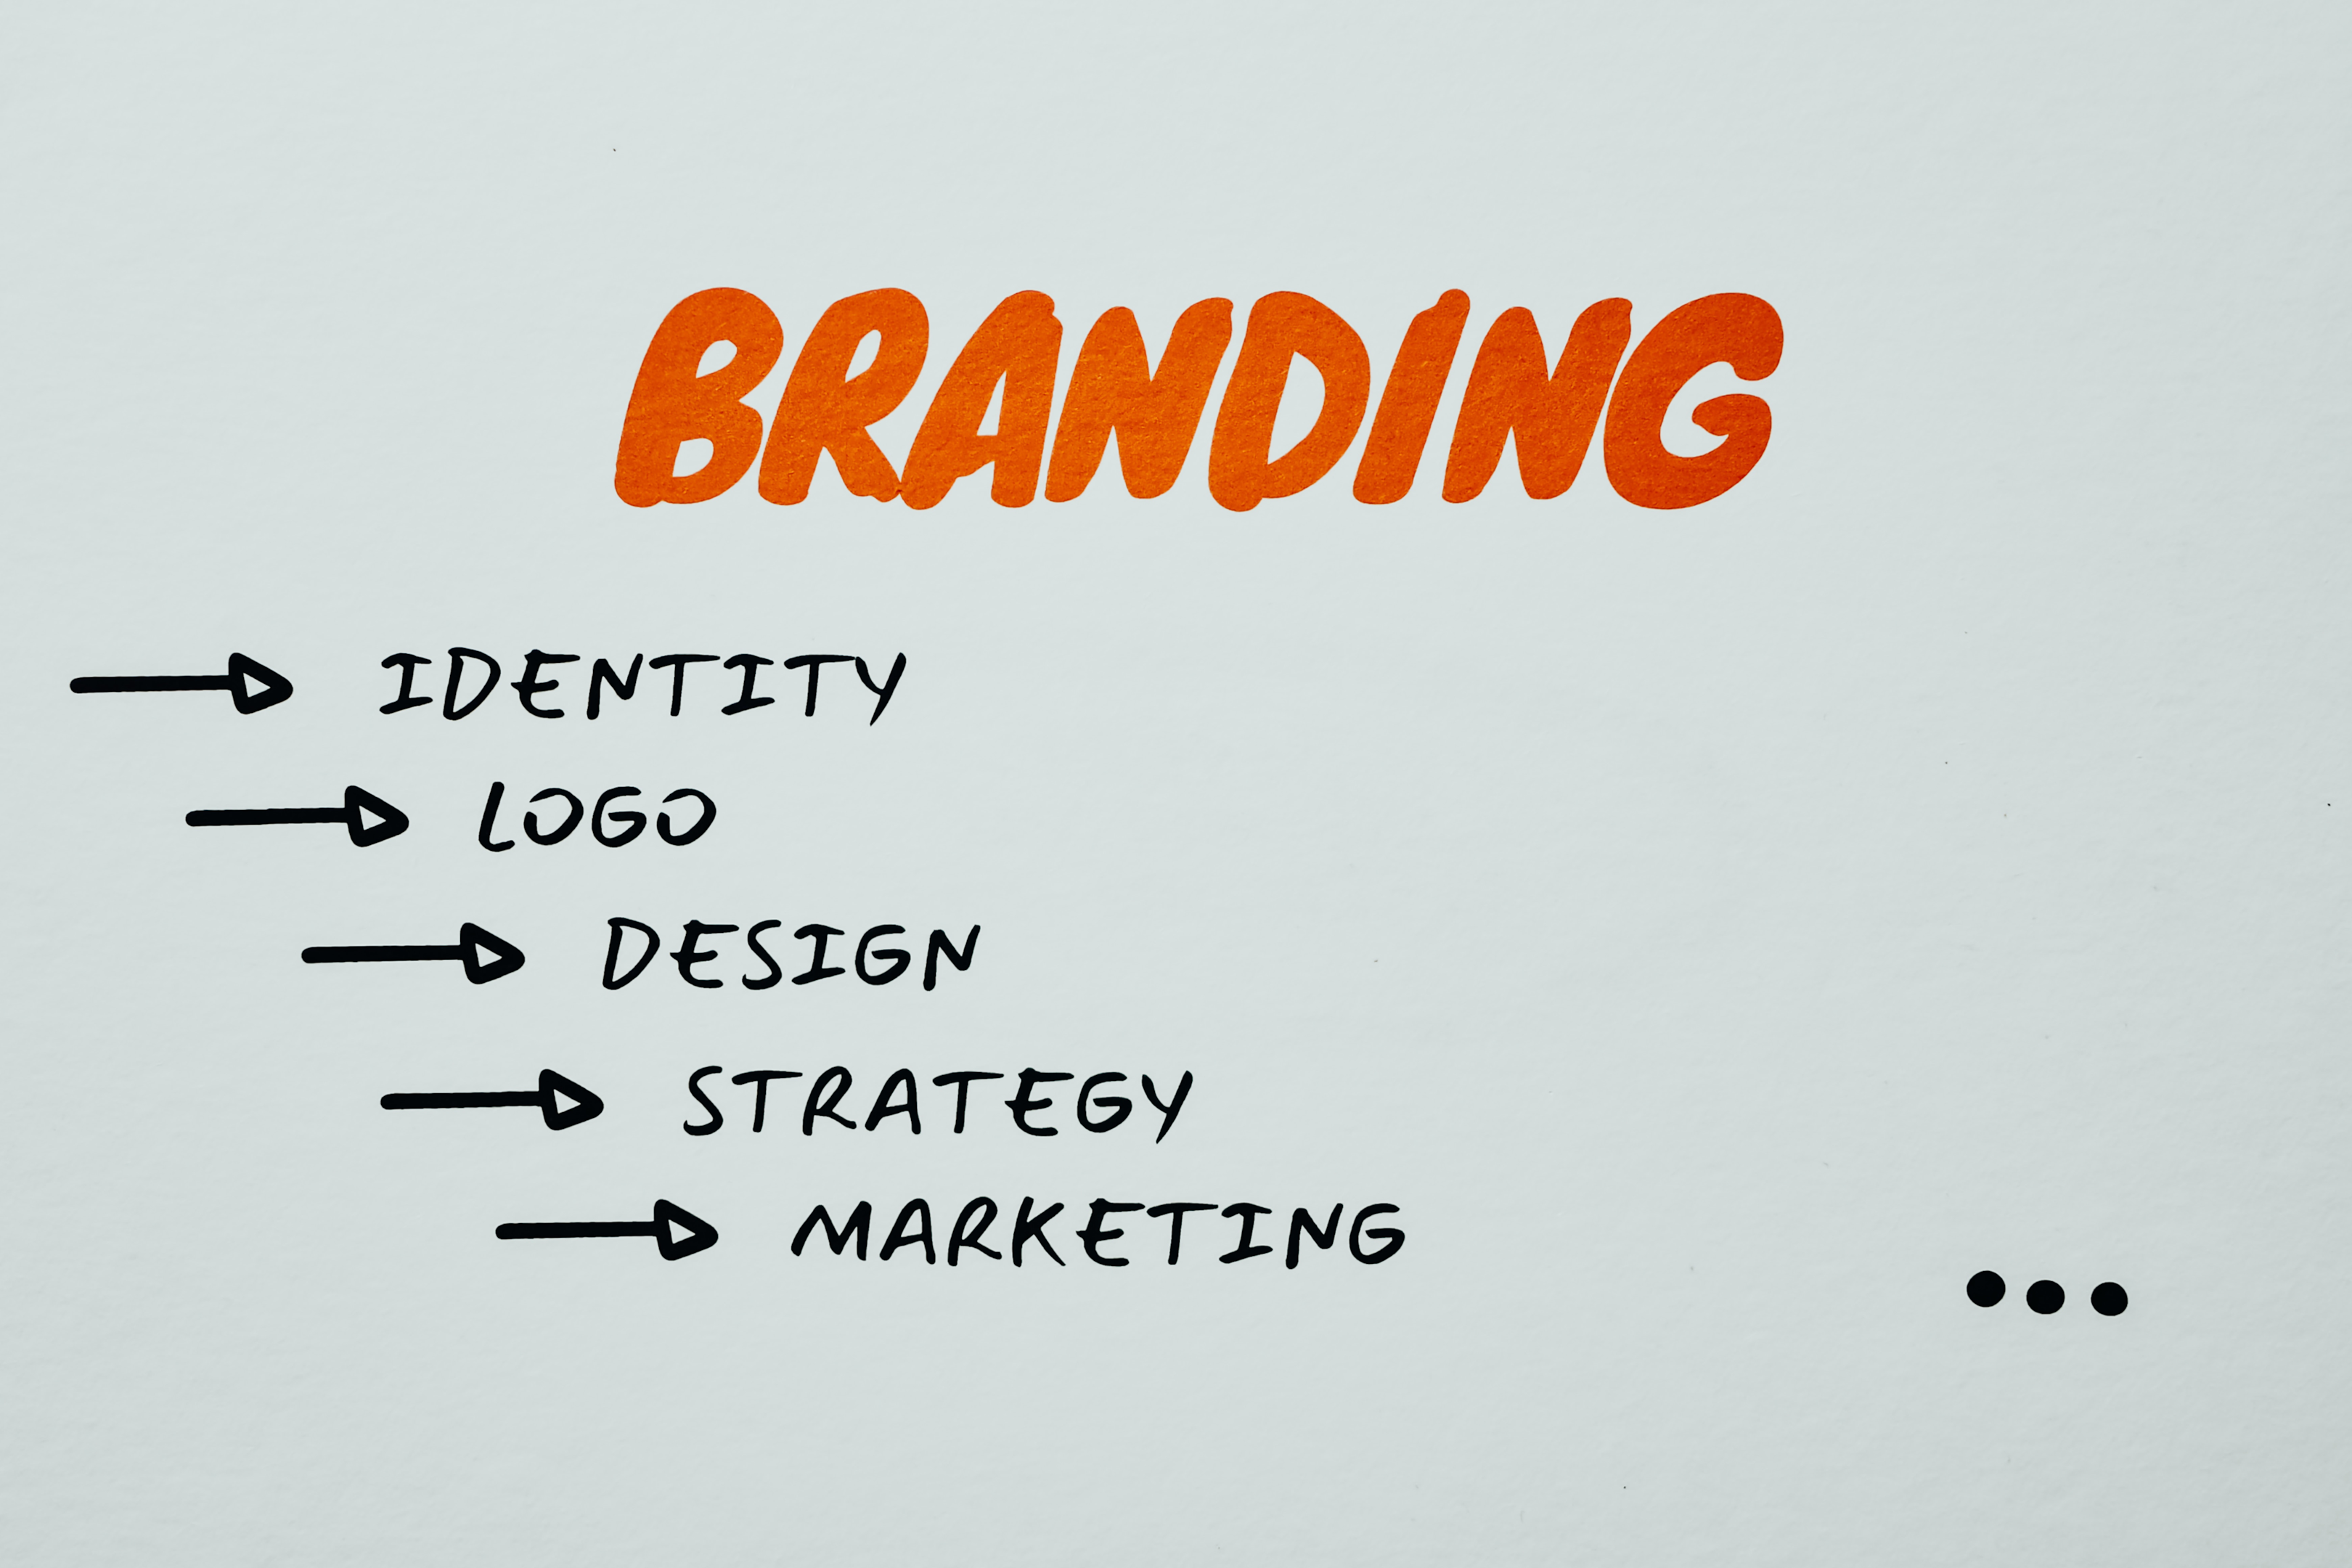 Graphic ads help in building brand